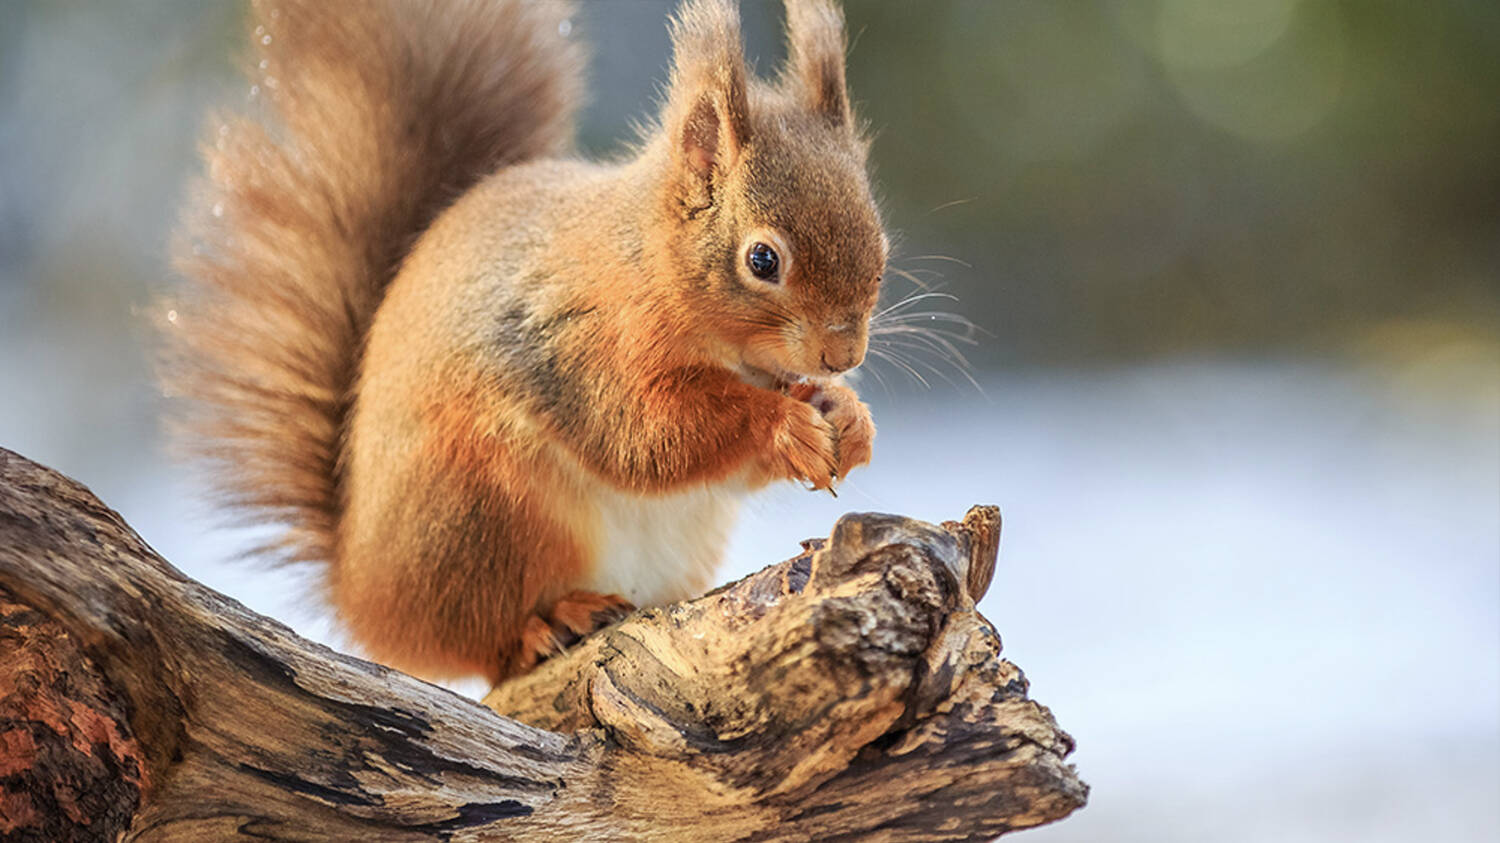 A red squirrel sits on a log, nibbling something held in its paws. Its very fluffy tail sticks straight up.